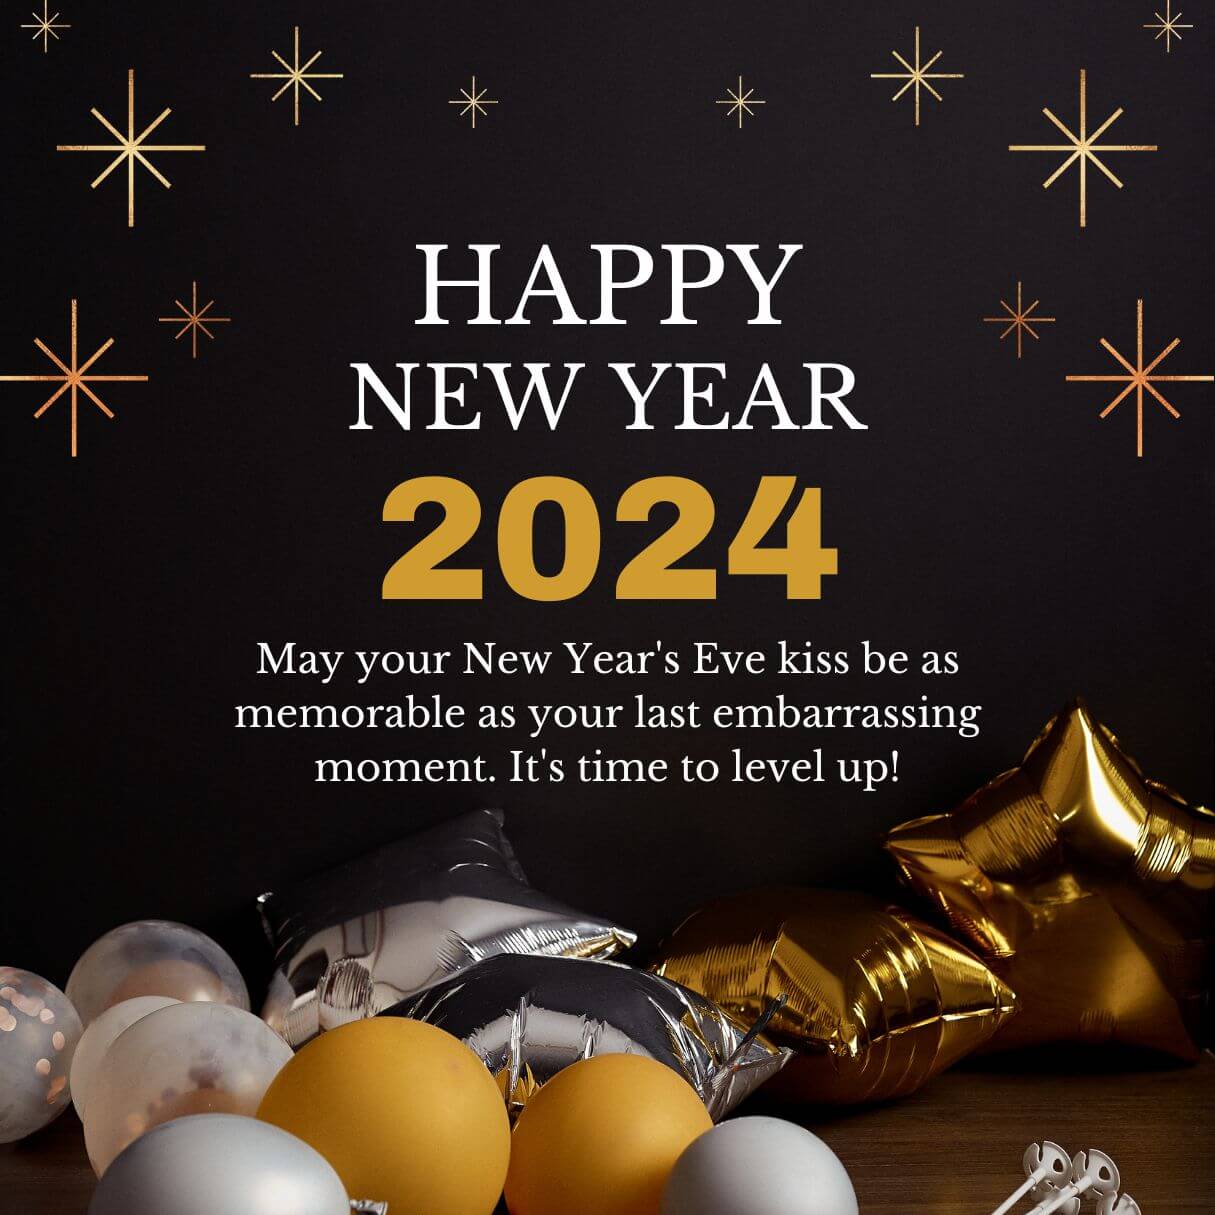 2024 Funny Happy New Year Wishes